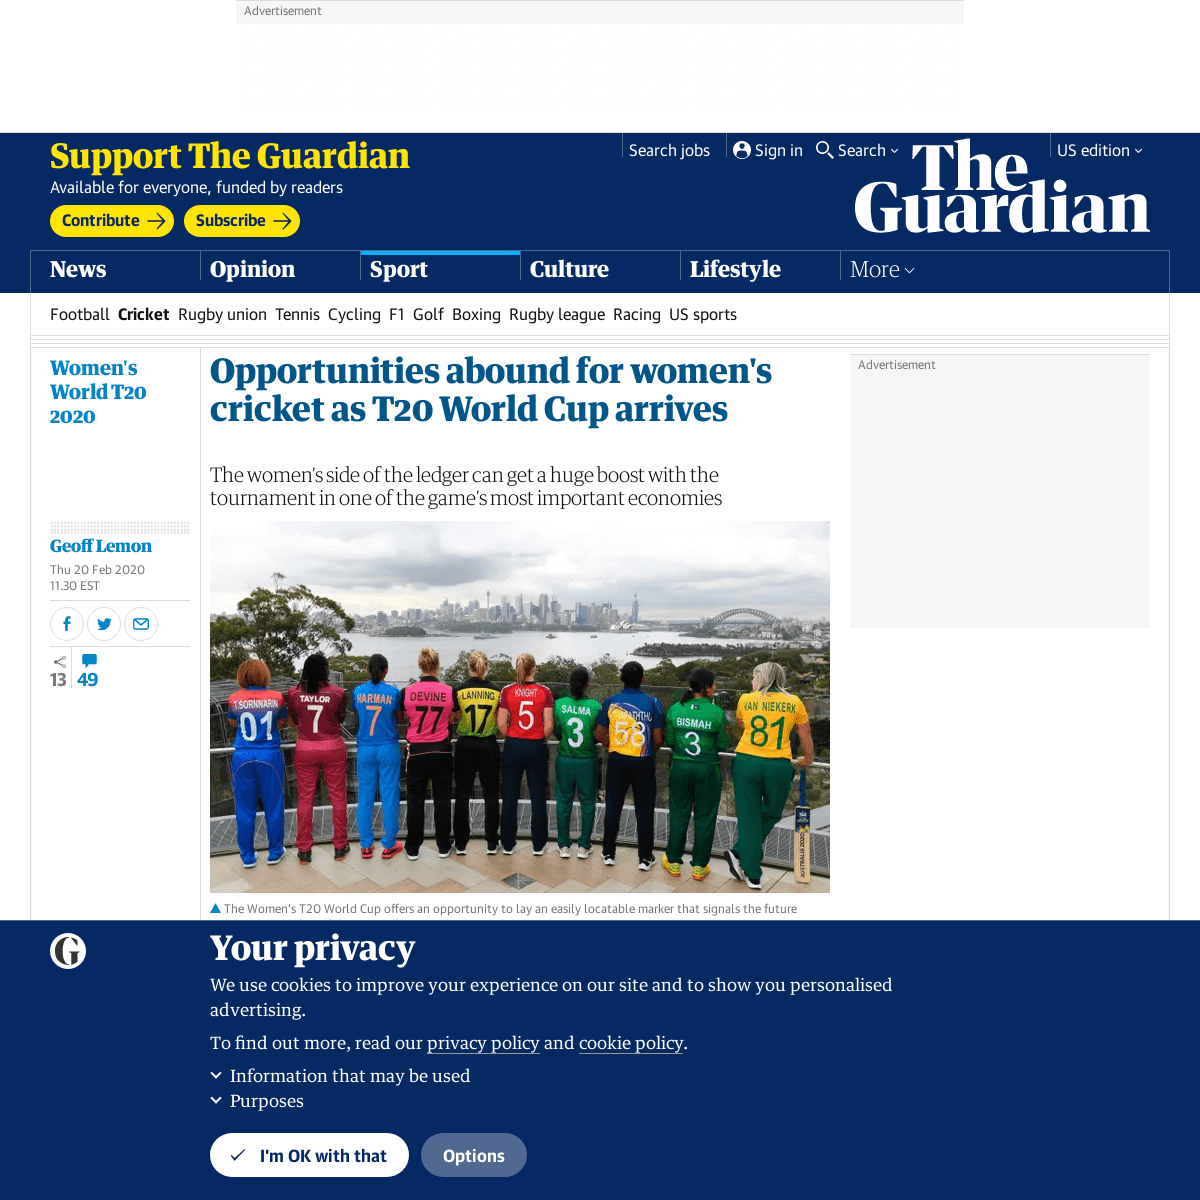 A complete backup of www.theguardian.com/sport/2020/feb/20/opportunities-abound-for-womens-cricket-as-t20-world-cup-arrives